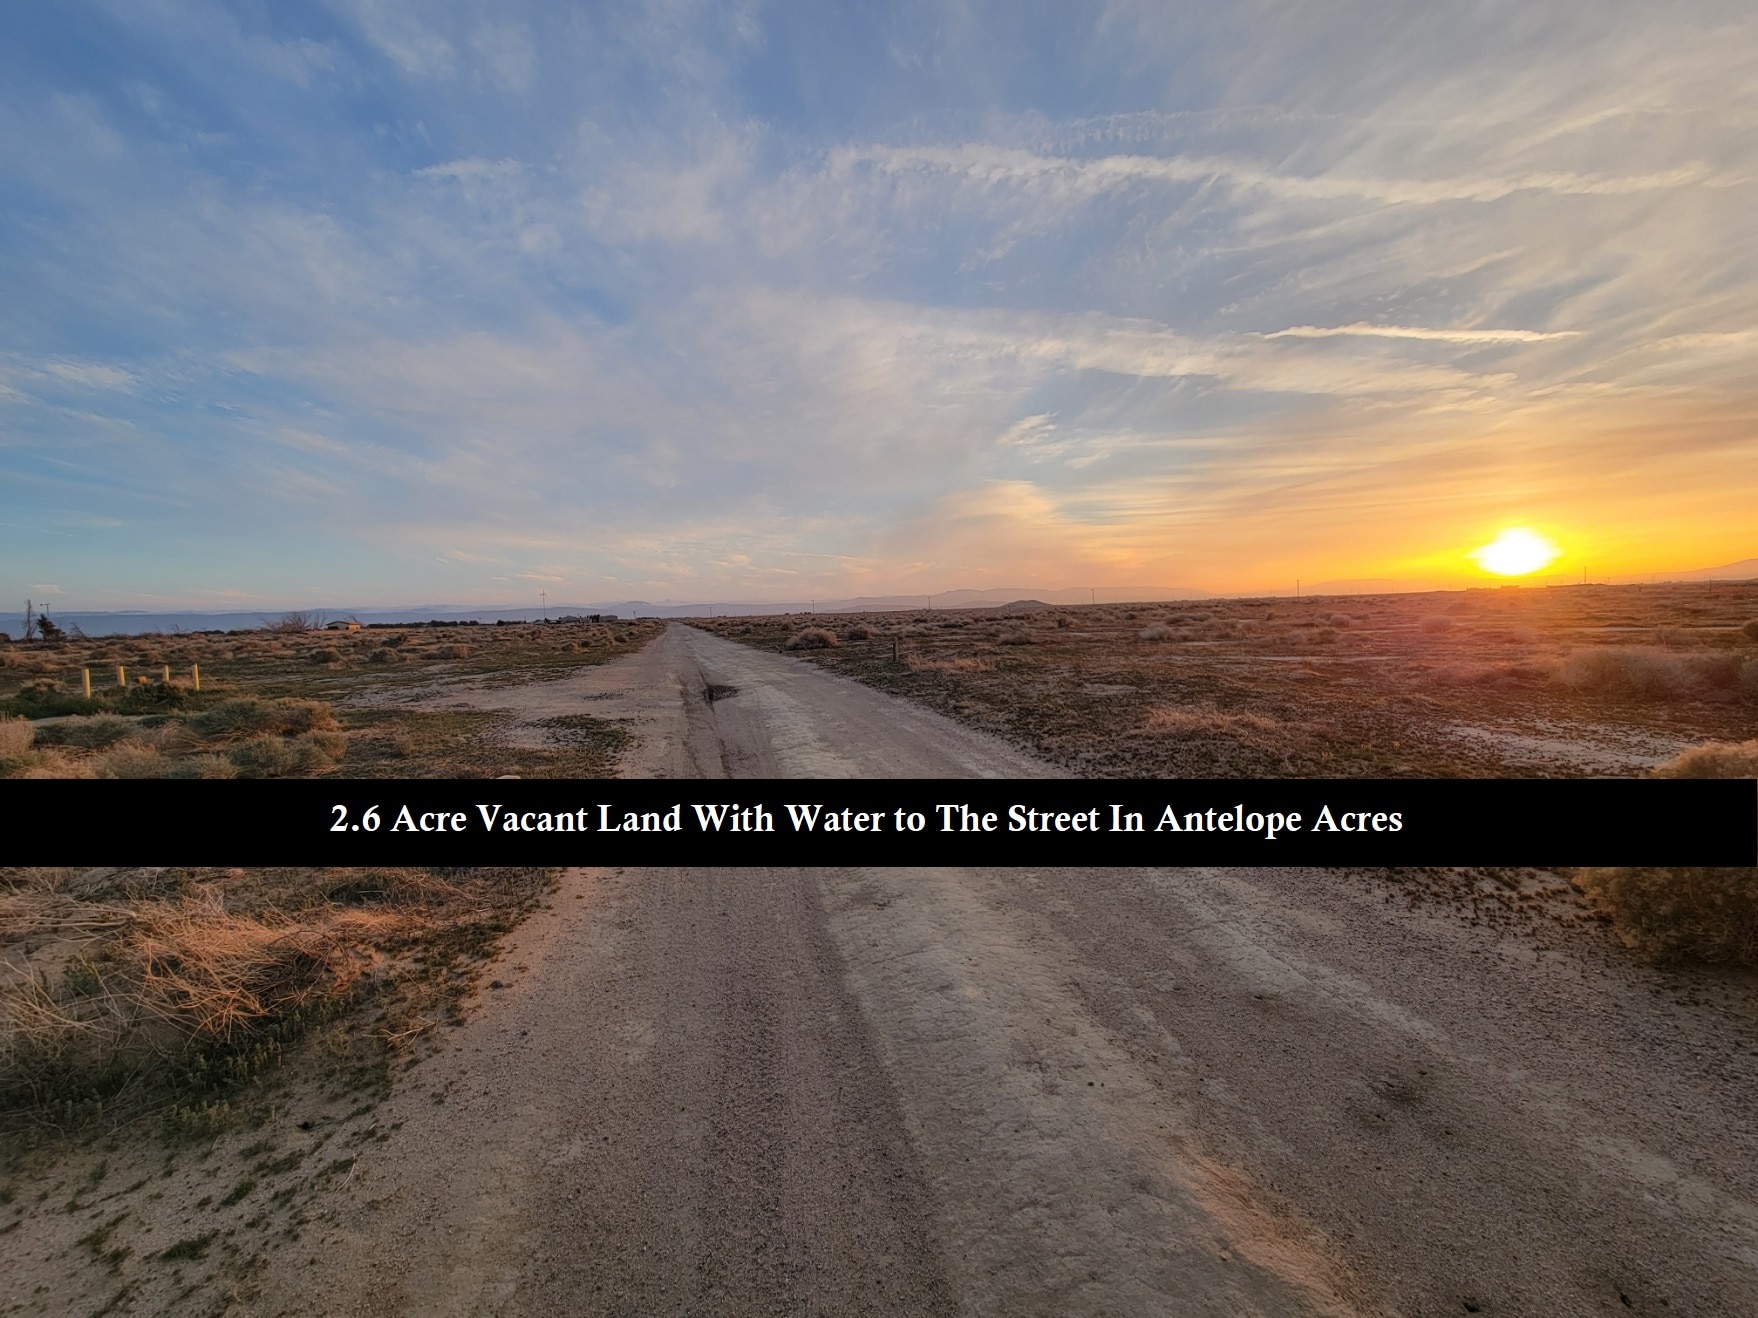 Build Your Dream Home Ranch On This 2.5 Acre Antelope Acres Vacant Land With Water To The Street